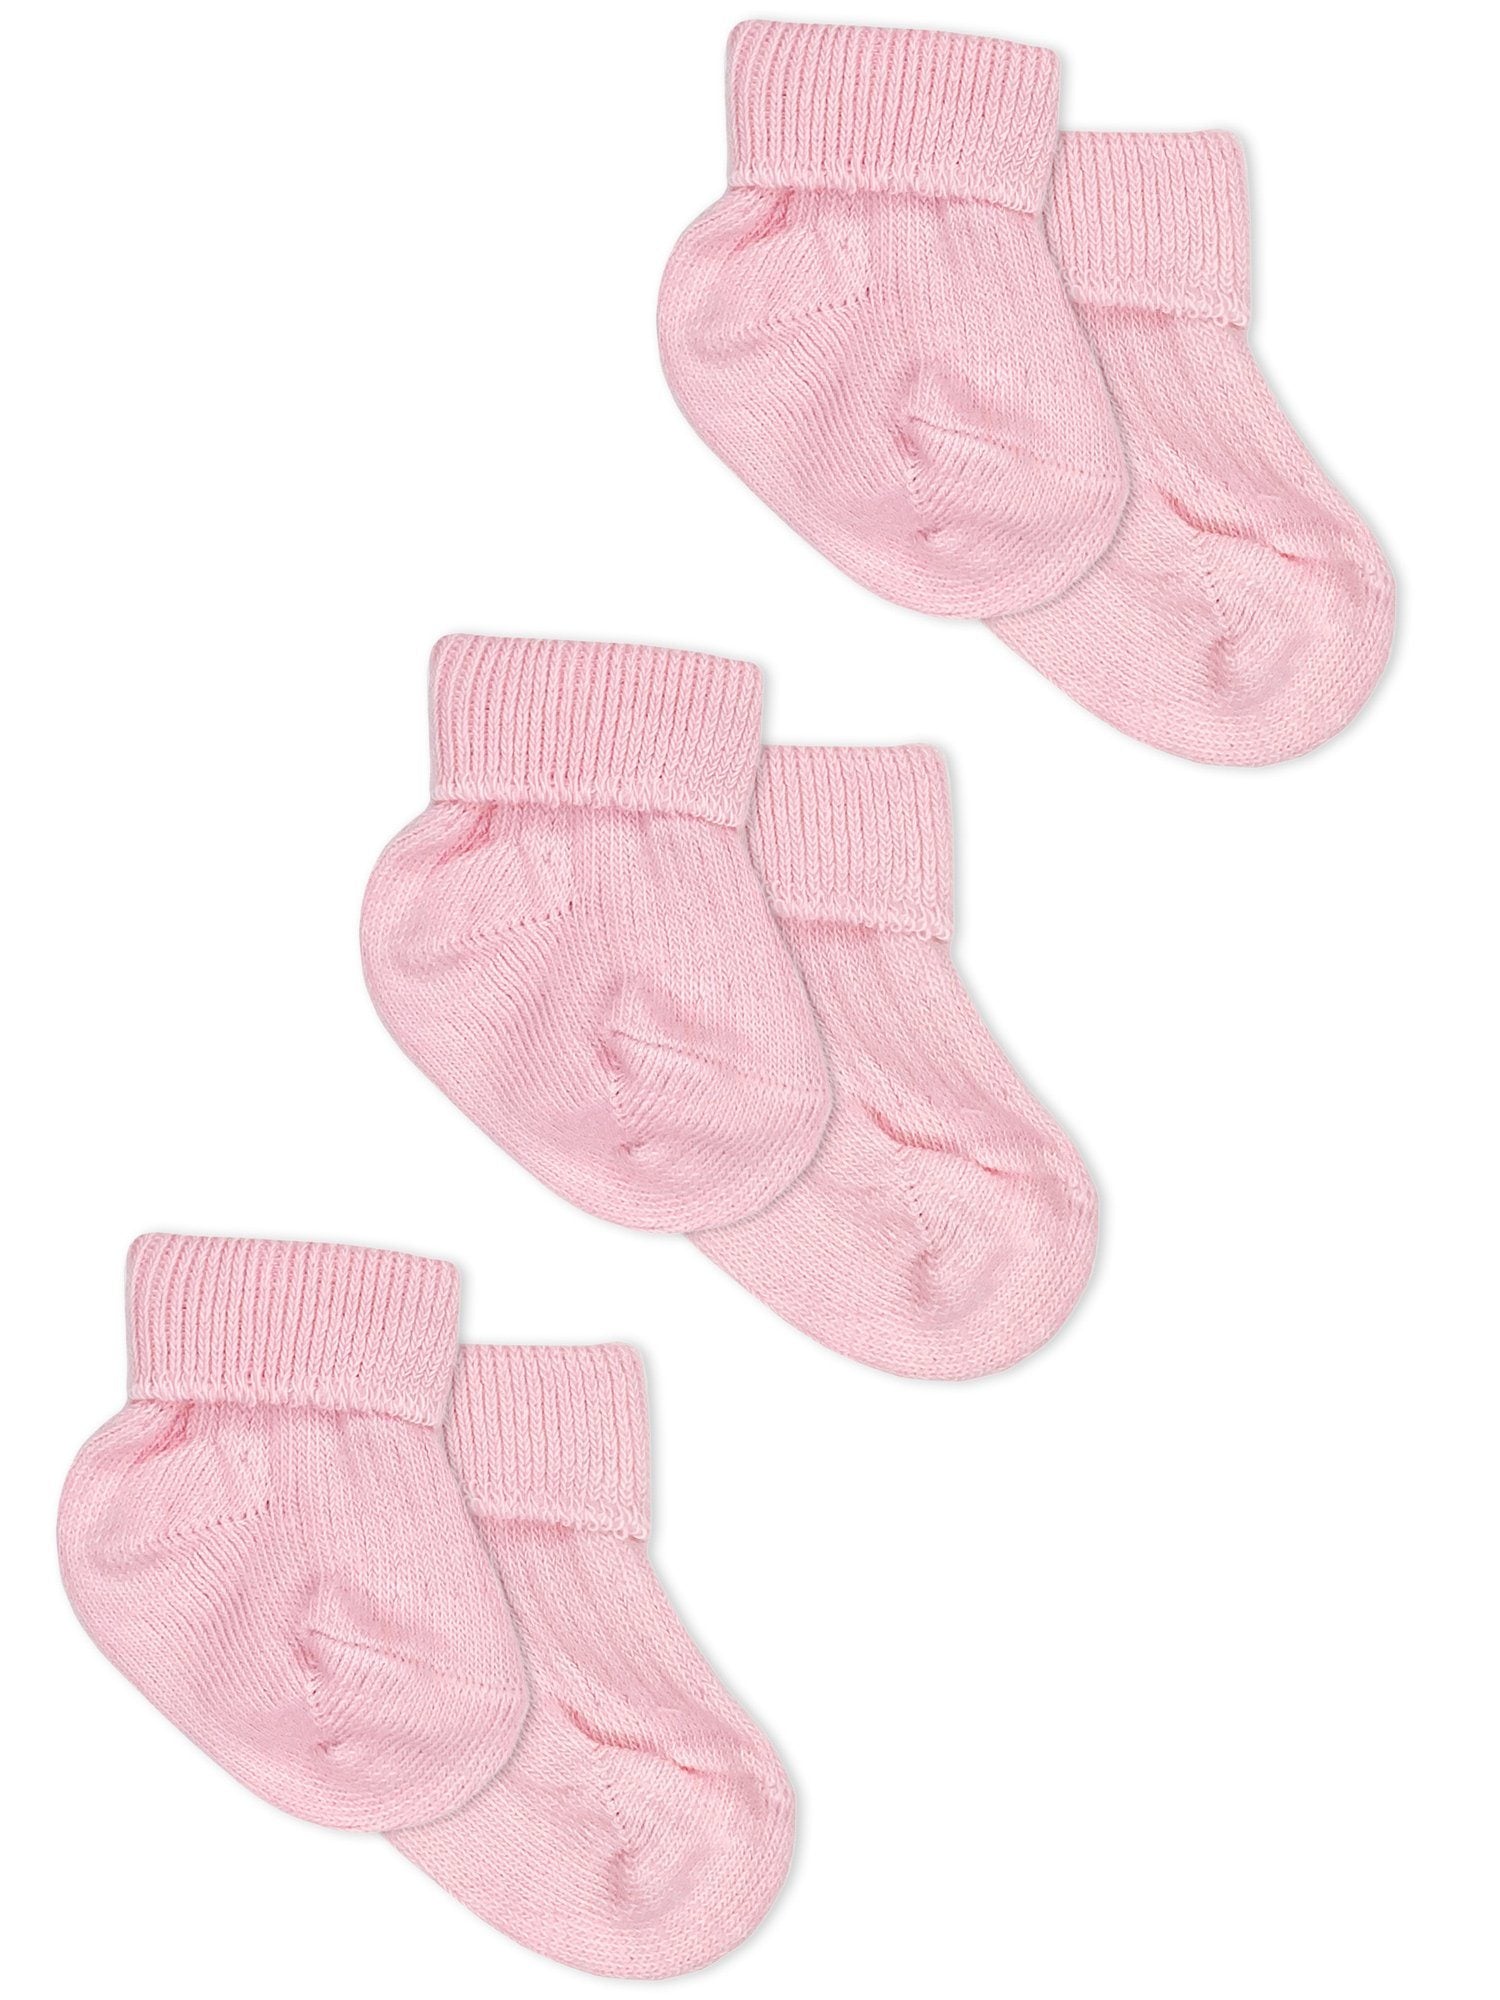 Tiny Baby Socks, Pink, 3 Pack Socks Little Mouse Baby Clothing & Gifts 